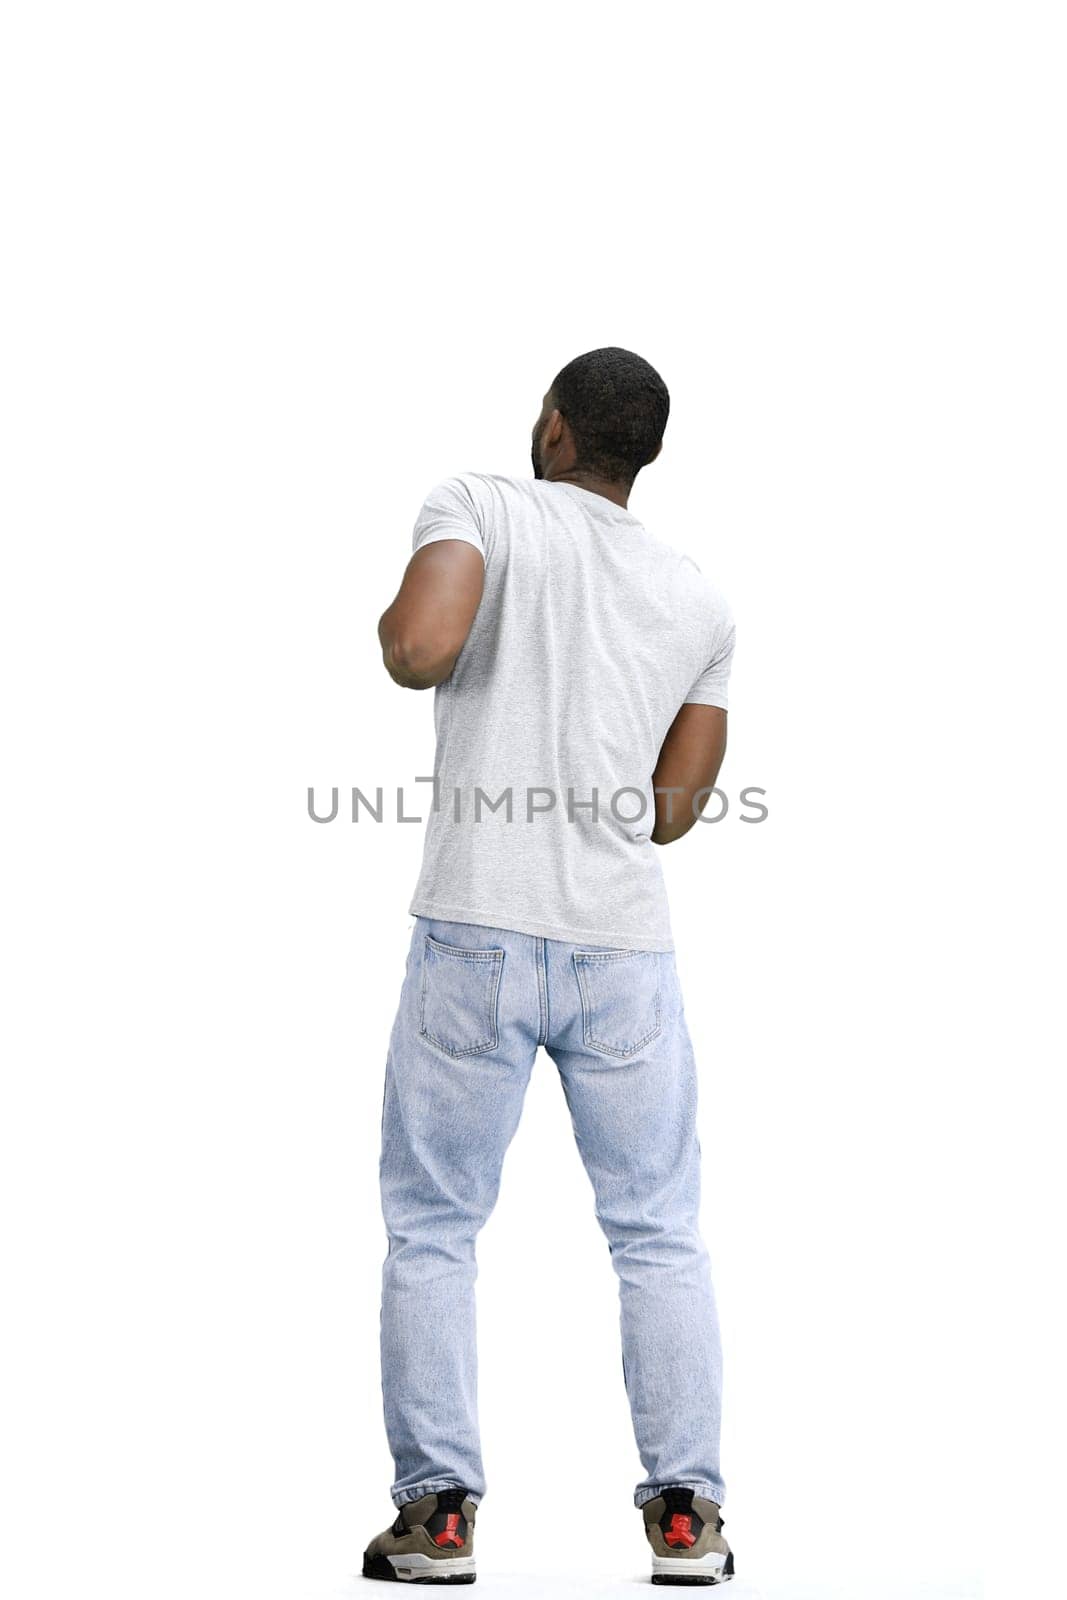 A man, full-length, on a white background, dancing by Prosto